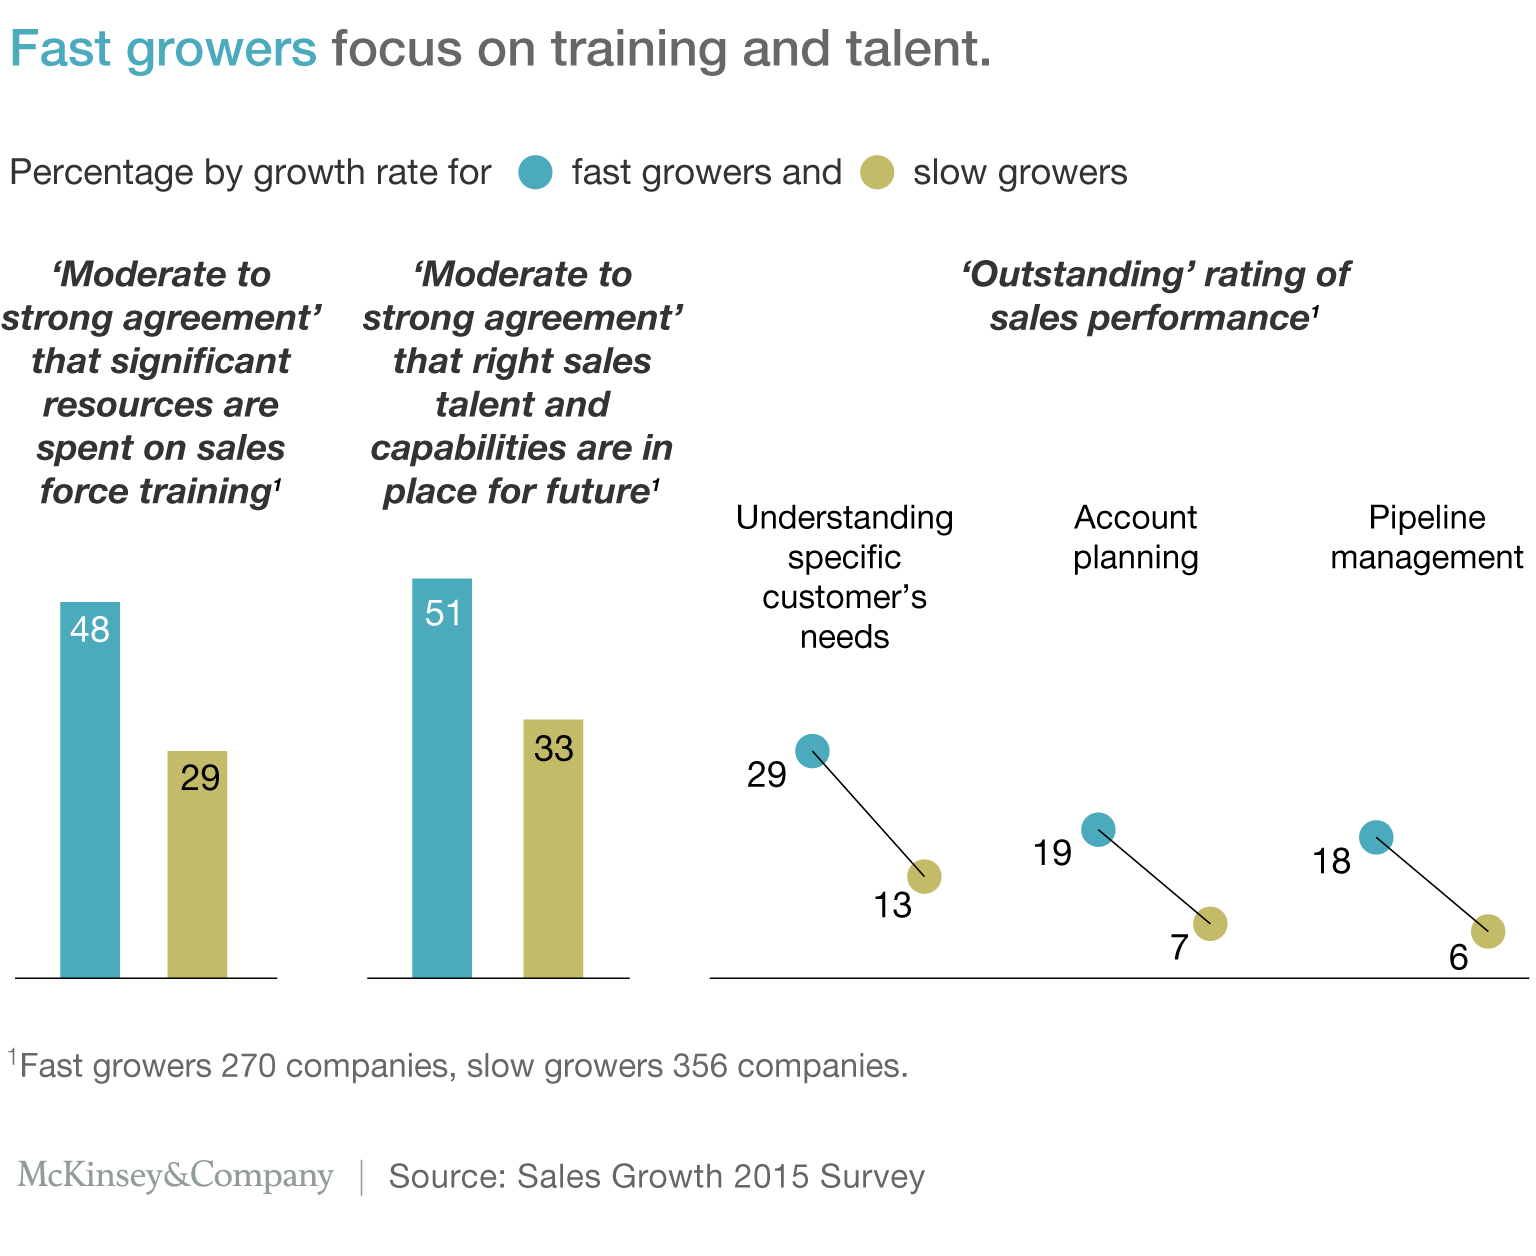 https://www.mckinsey.com/~/media/mckinsey/business%20functions/marketing%20and%20sales/our%20insights/the%20sales%20secrets%20of%20high%20growth%20companies/salesgrowthsurvey6-exhibit4-png.png?cq=50&cpy=Center